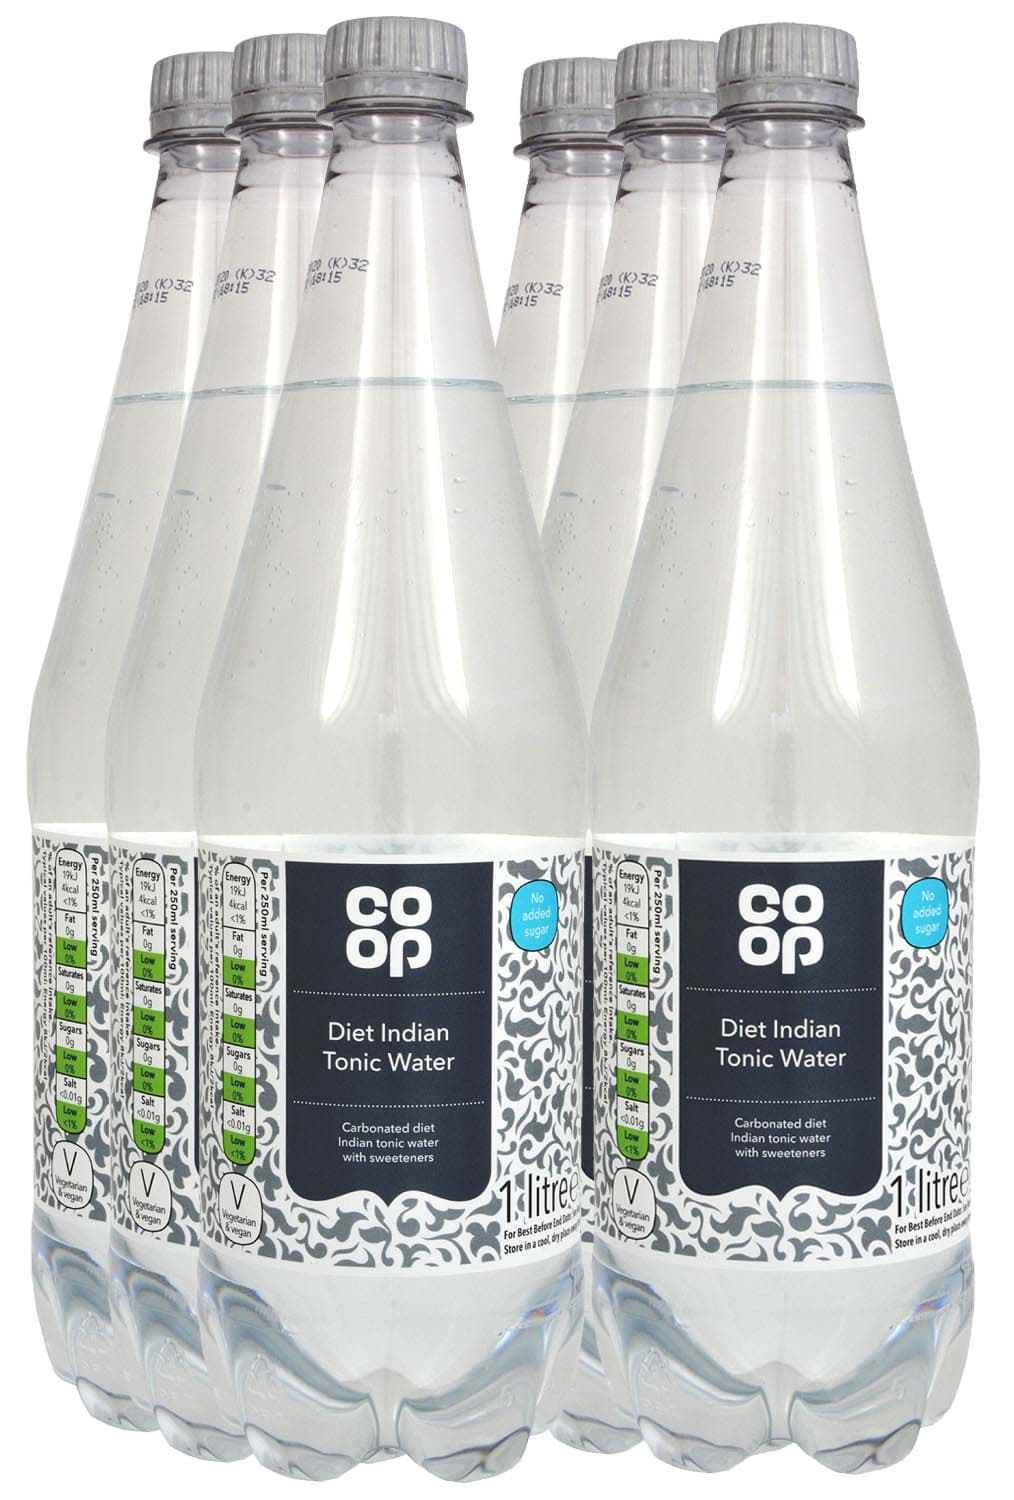 Picture of Co-op Diet Indian Tonic Water 1 Litre x6